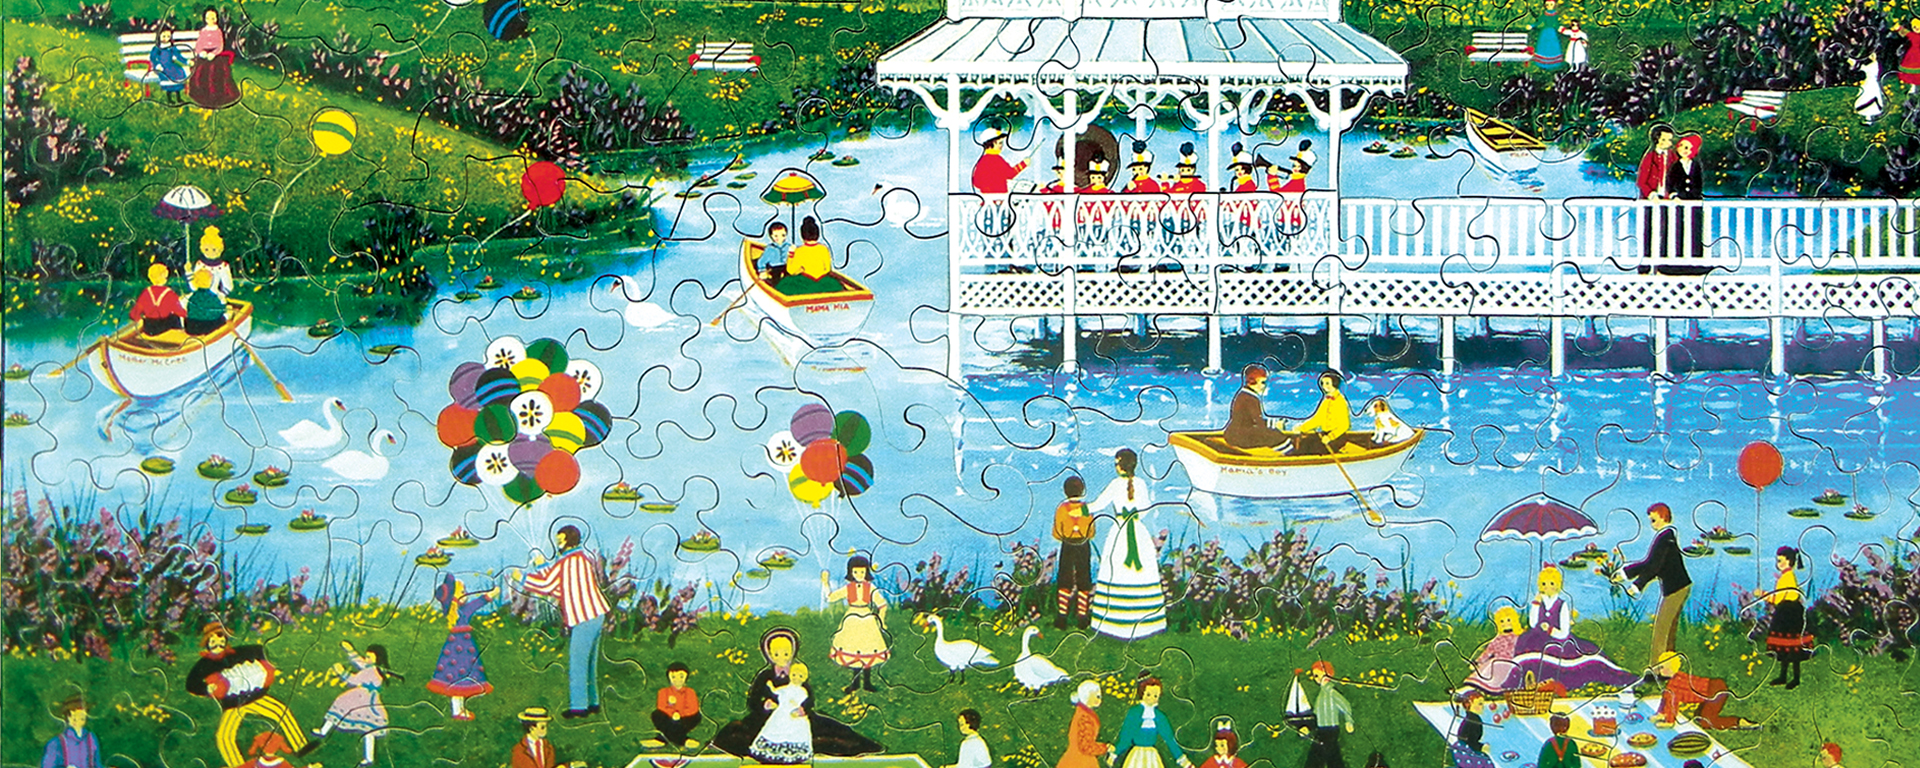 Wooden jigsaw Mother’s Day puzzle depicting a day at the park. The park is full of people doing activities in and around the pond in the center.